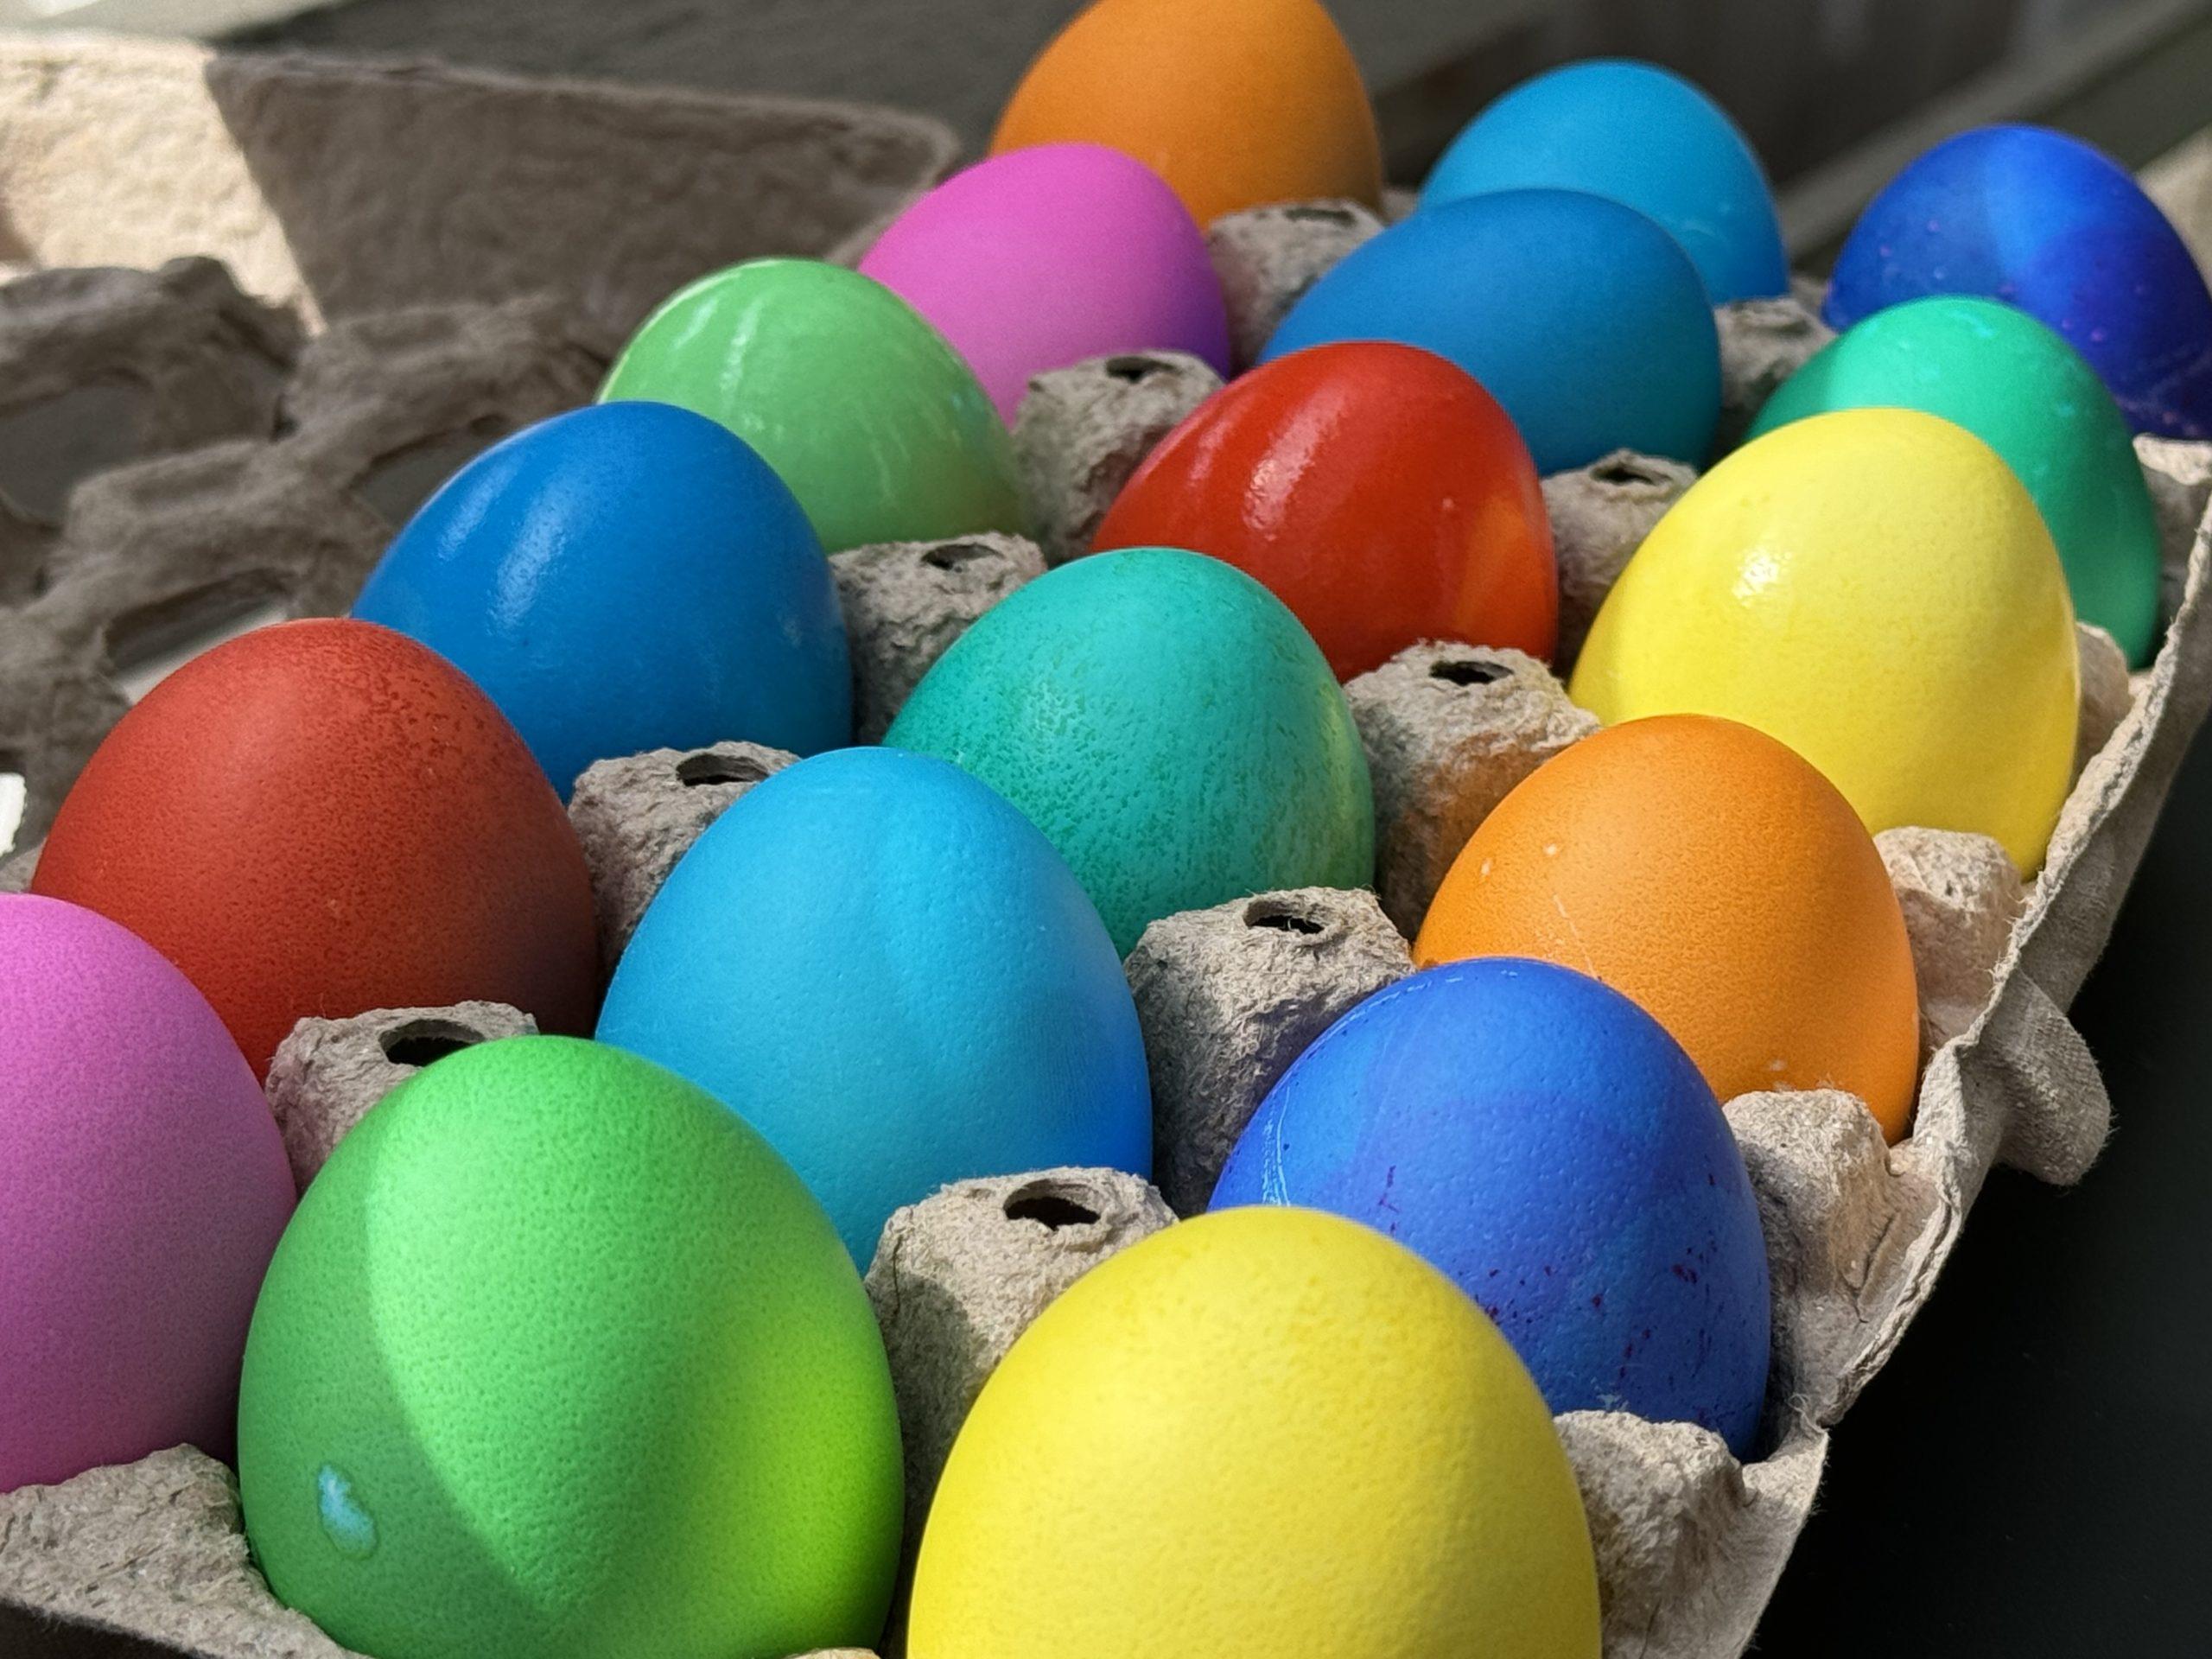 Eighteen freshly dyed eggs in bright red, yellow, pink, greens, and blues, in an egg carton in the sun.